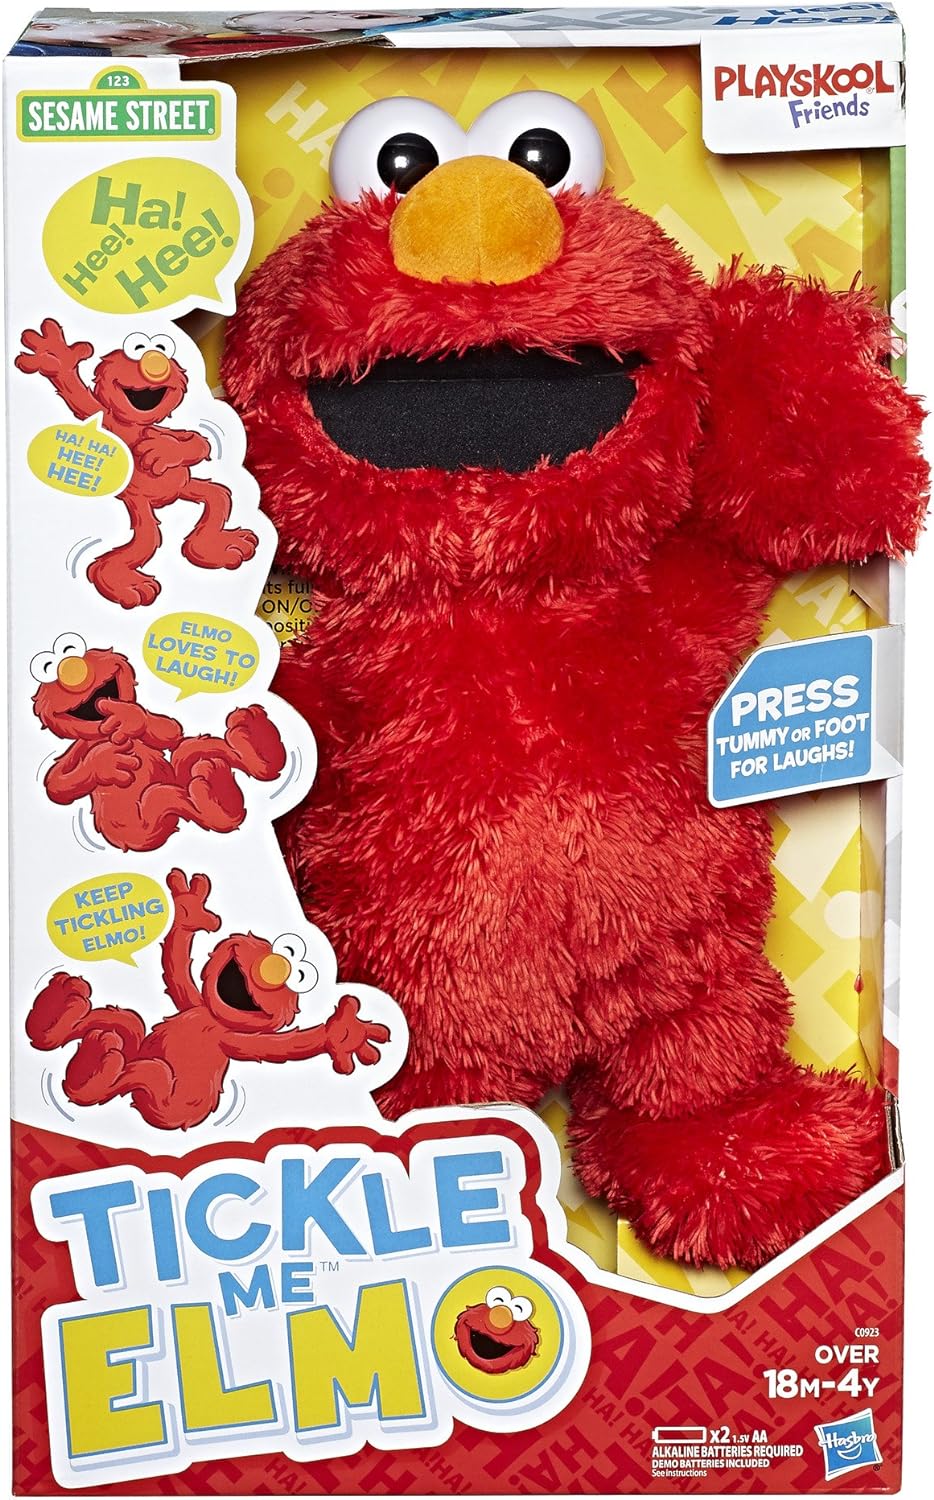 Magic Mixies' toy is harder to get than 'Tickle Me Elmo